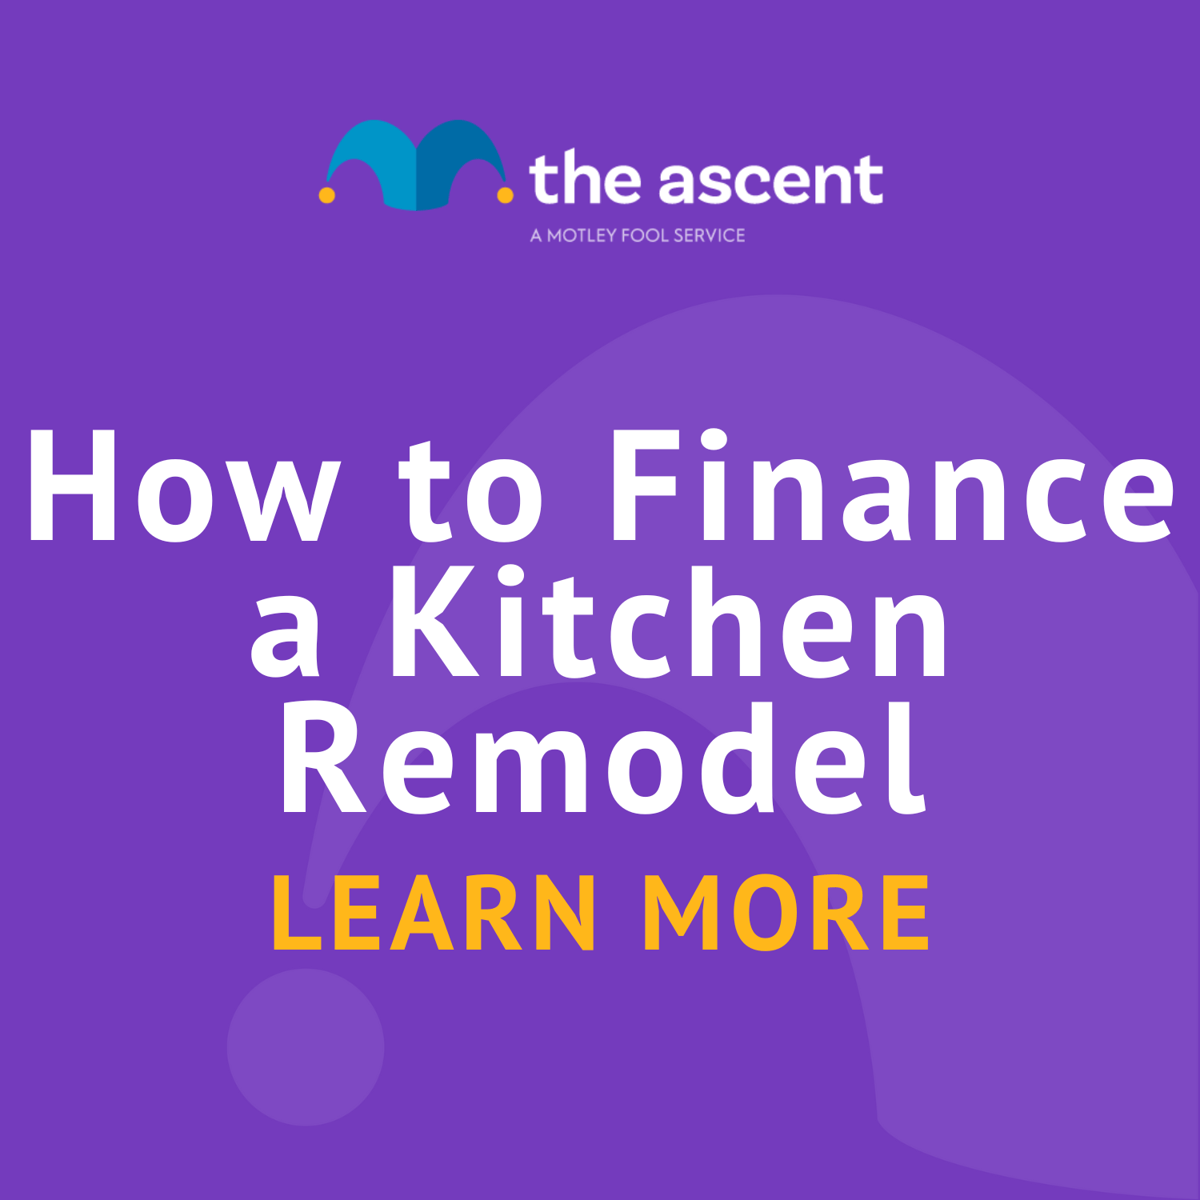 How to Finance a Kitchen Remodel